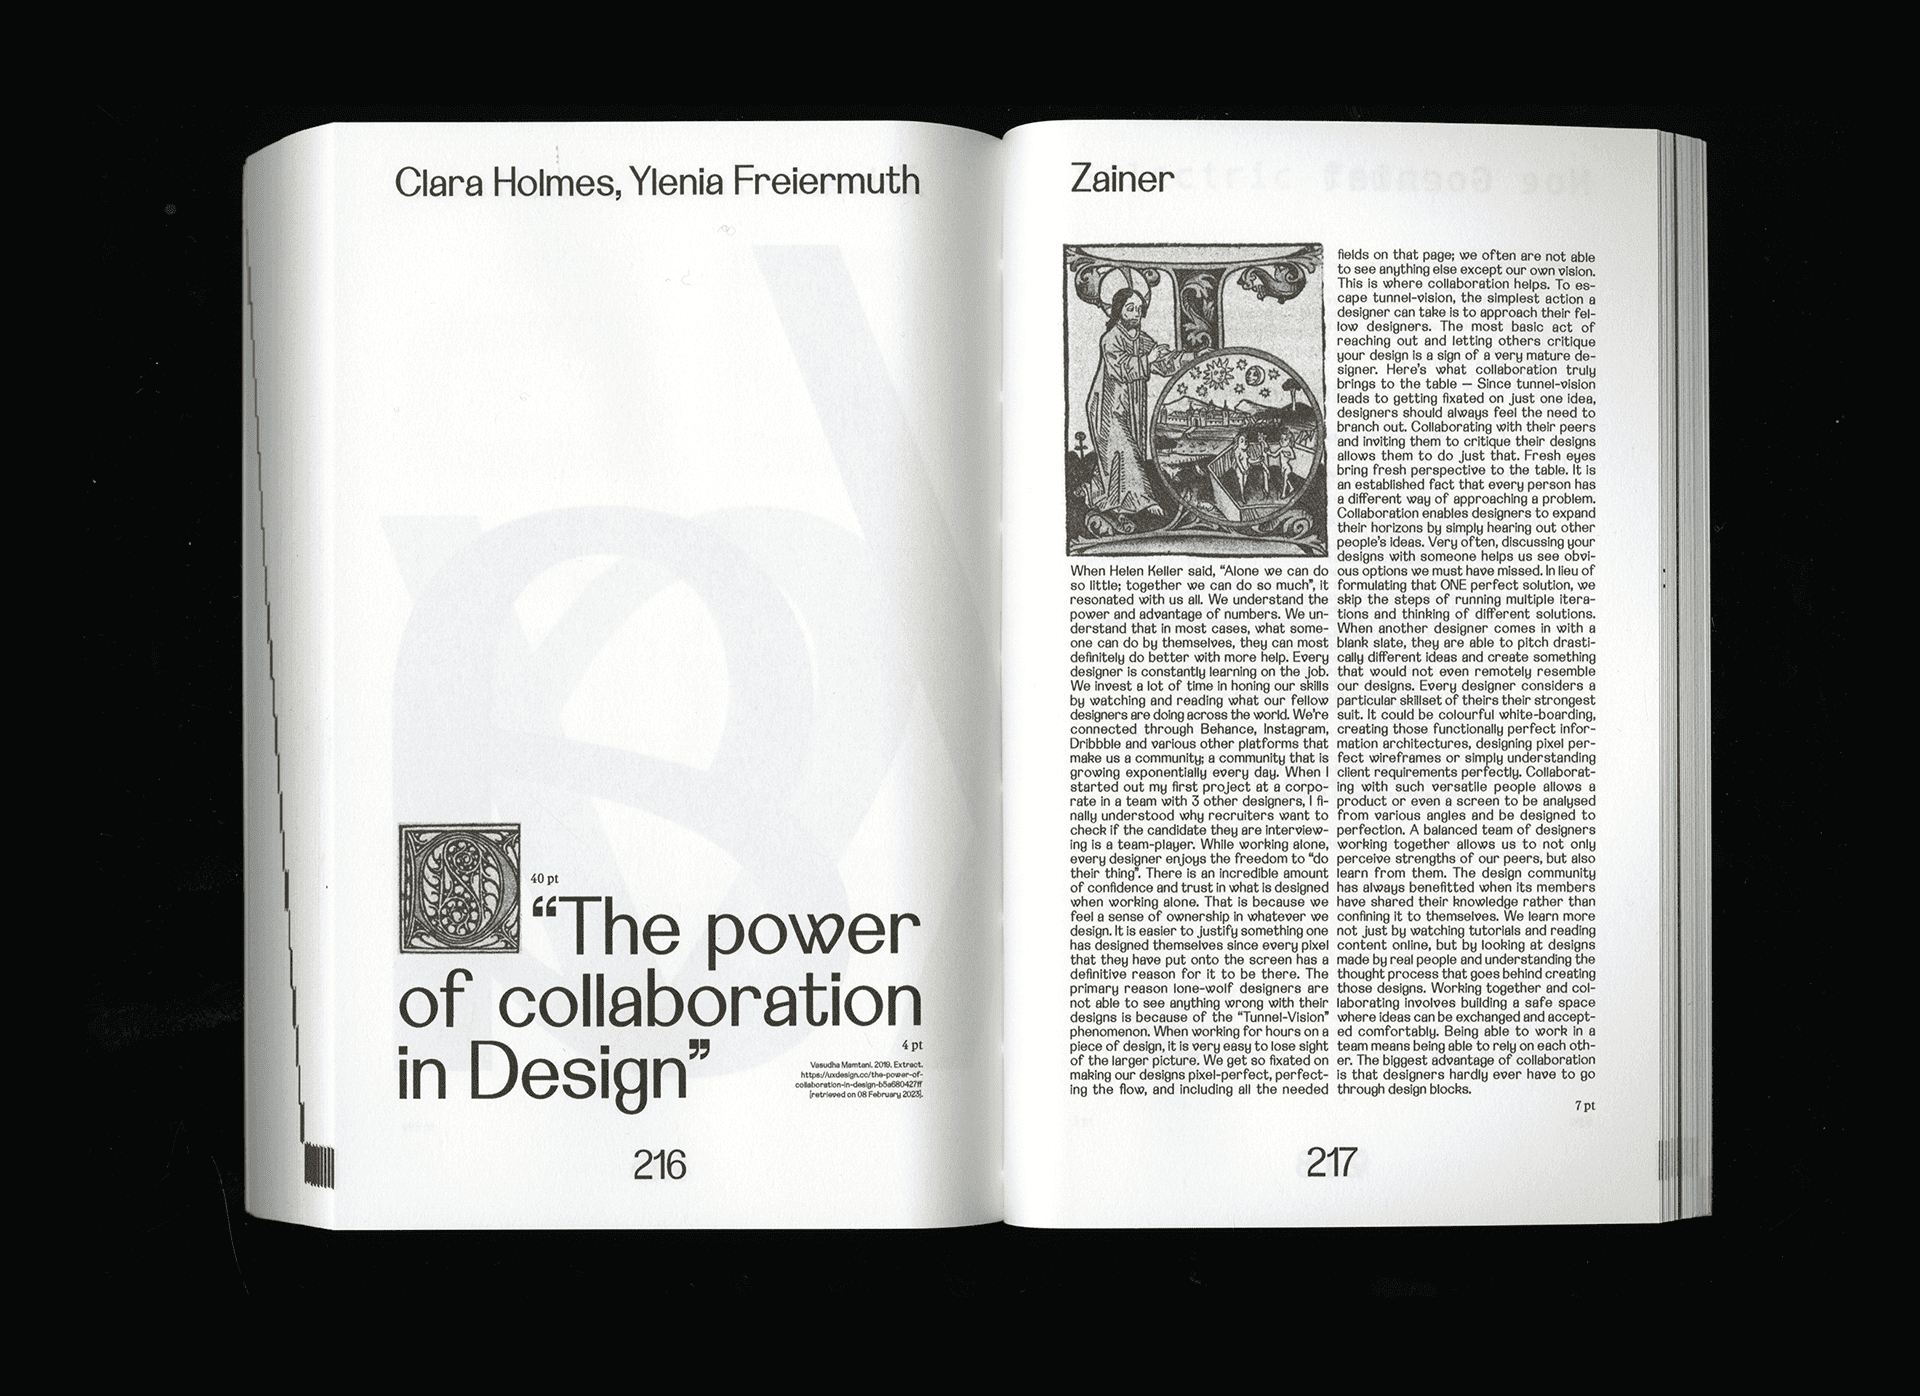 Zainer specimen, published in 'is every typeface a revival?' 